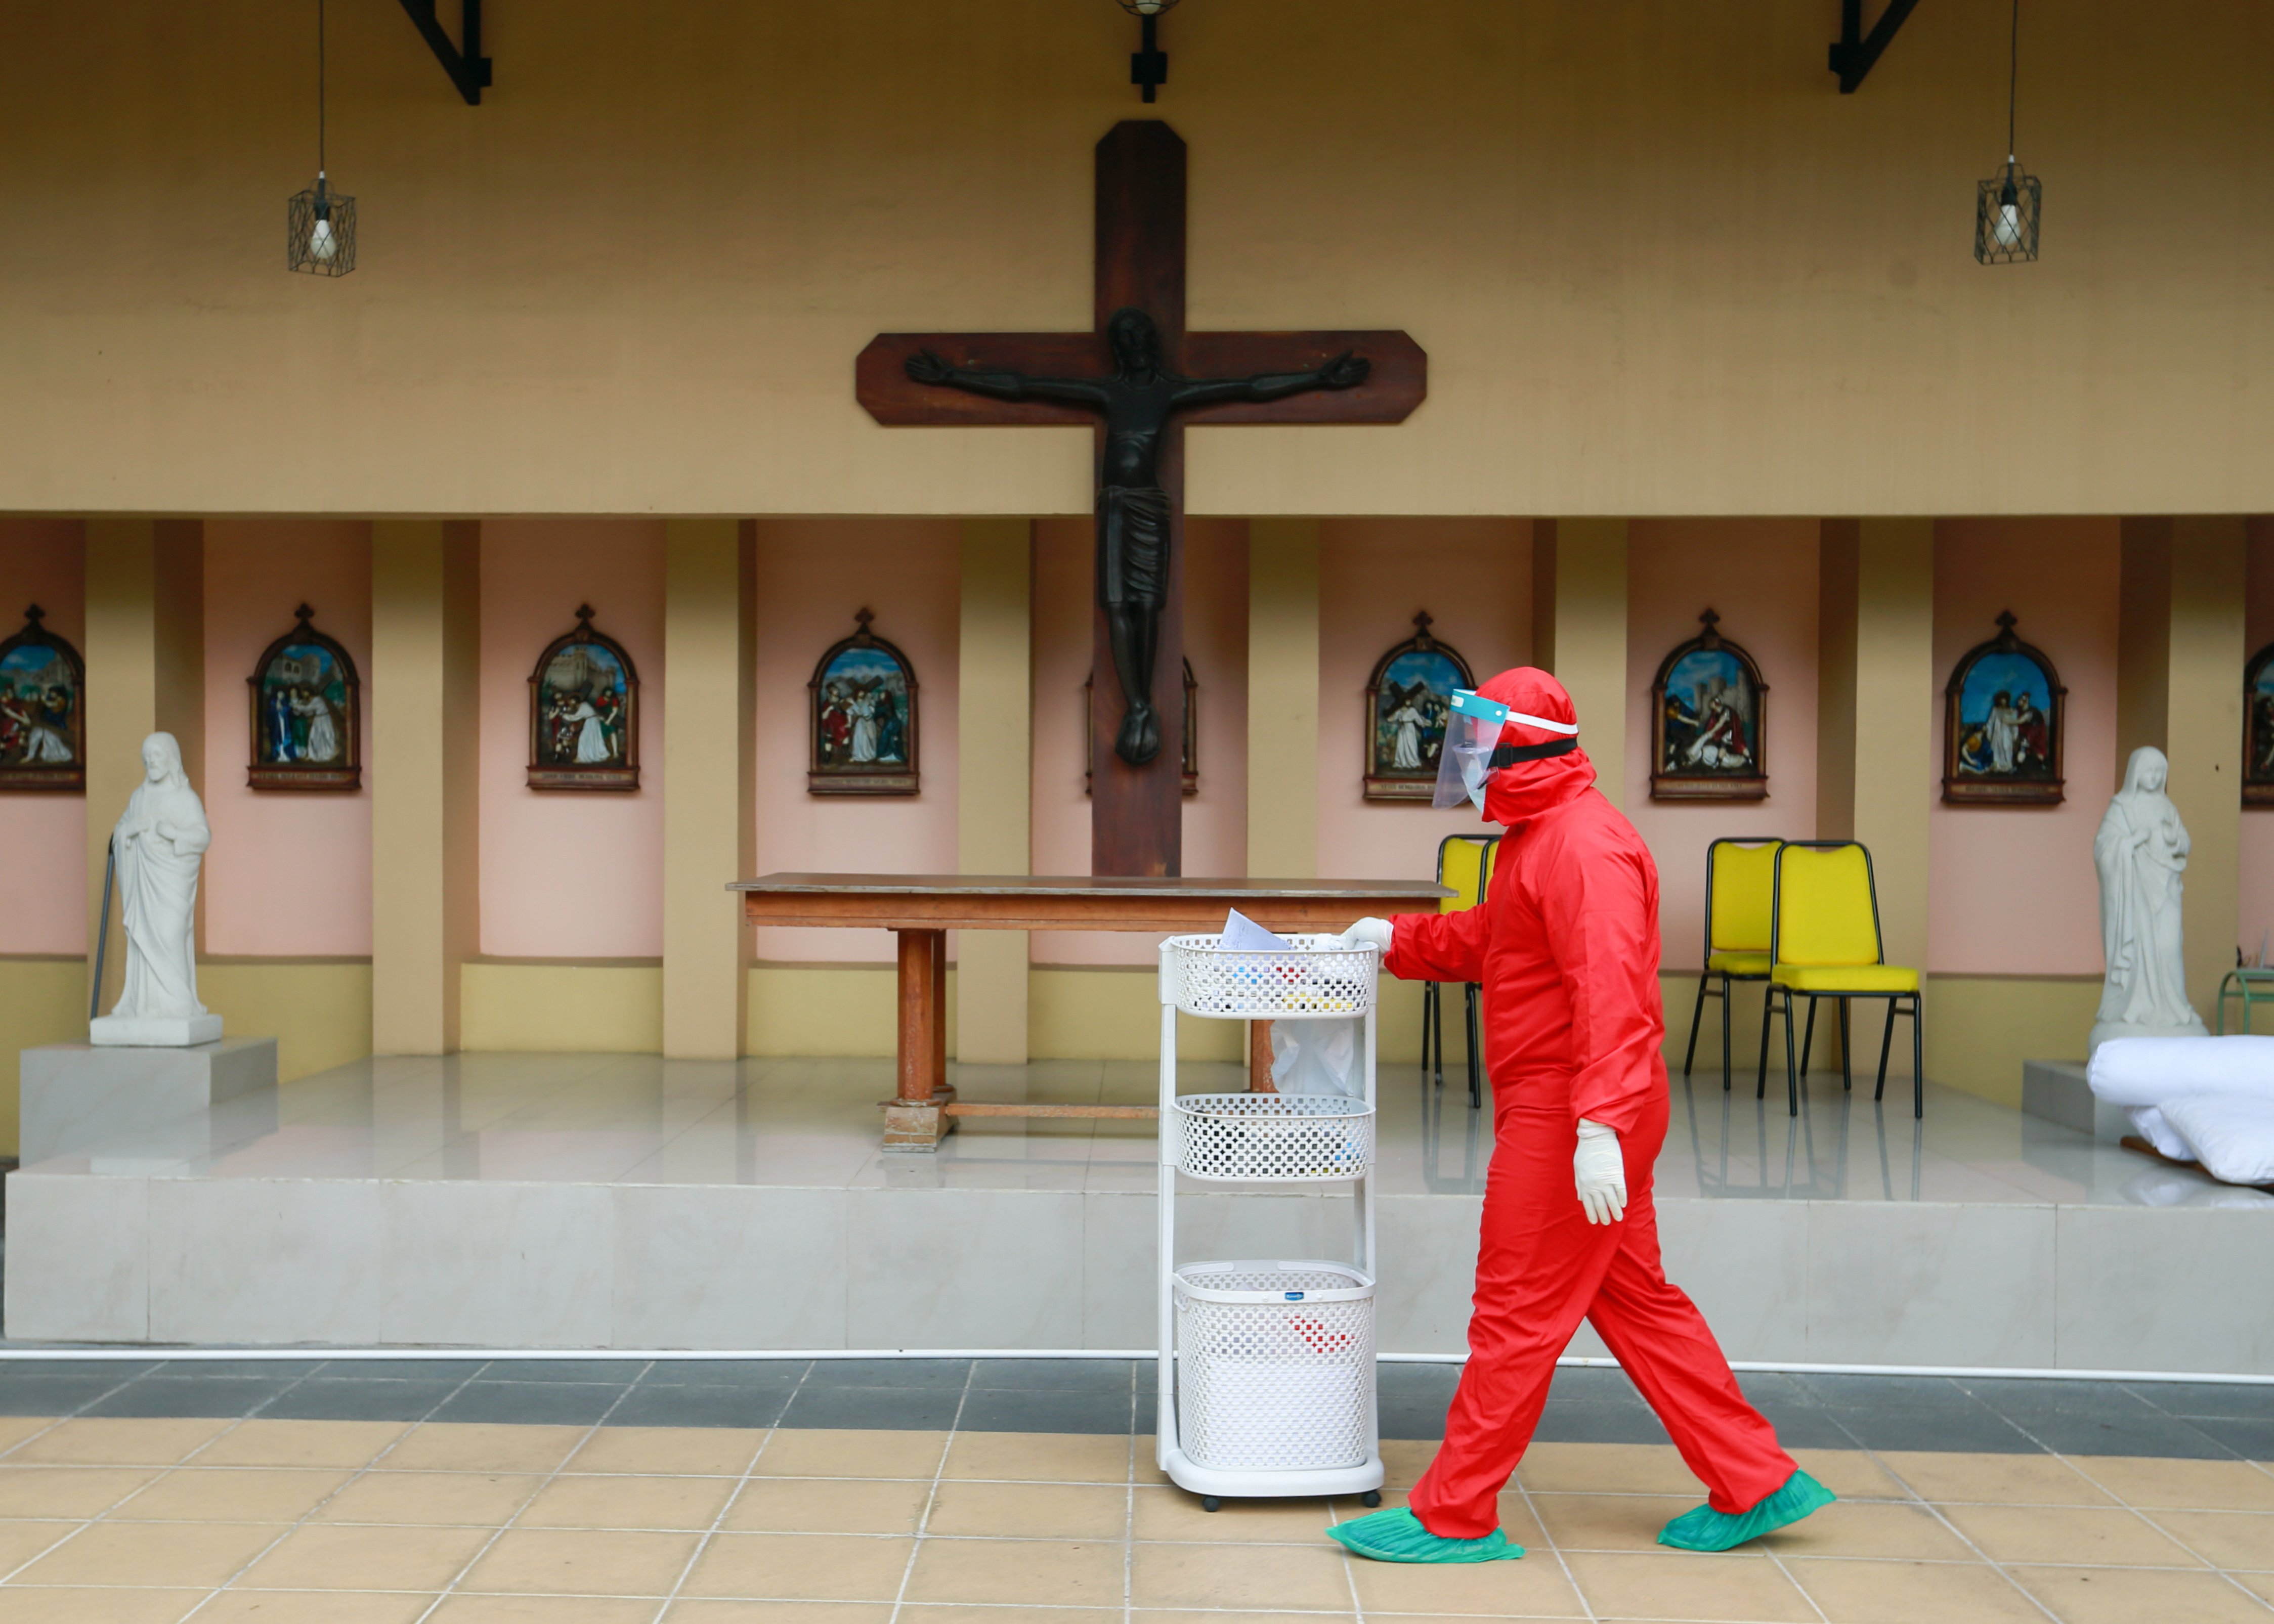 A health care makes rounds at a Catholic church training center turned into a self-isolation shelter for COVID-19 patients in Jakarta, Indonesia, July 22, 2021. (CNS photo/Ajeng Dinar Ulfiana, Reuters)